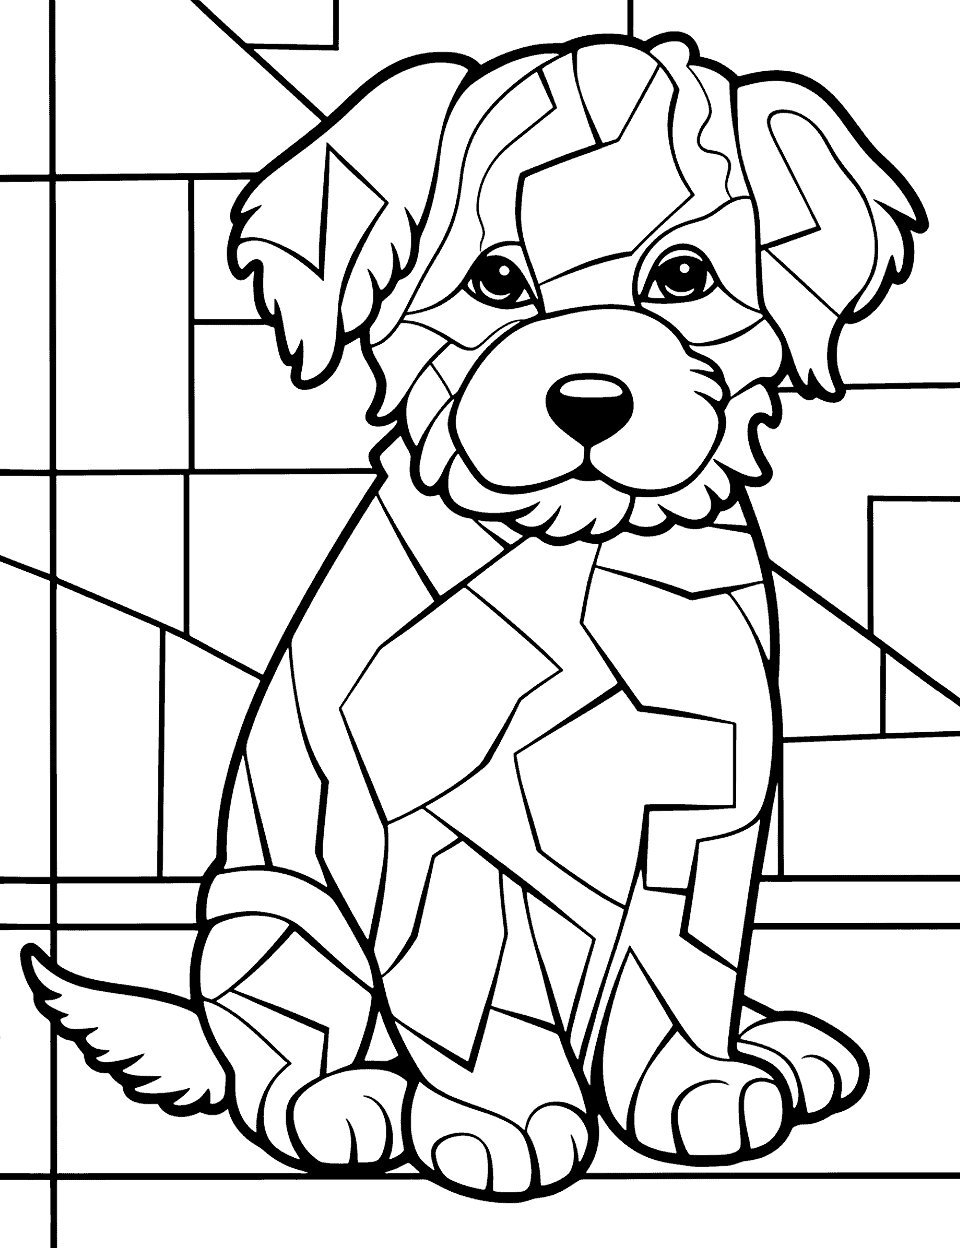 Artist's Dream Abstract Art Goldendoodle Puppy Coloring Page - A Goldendoodle puppy turned into an abstract work of art with different geometric shapes.